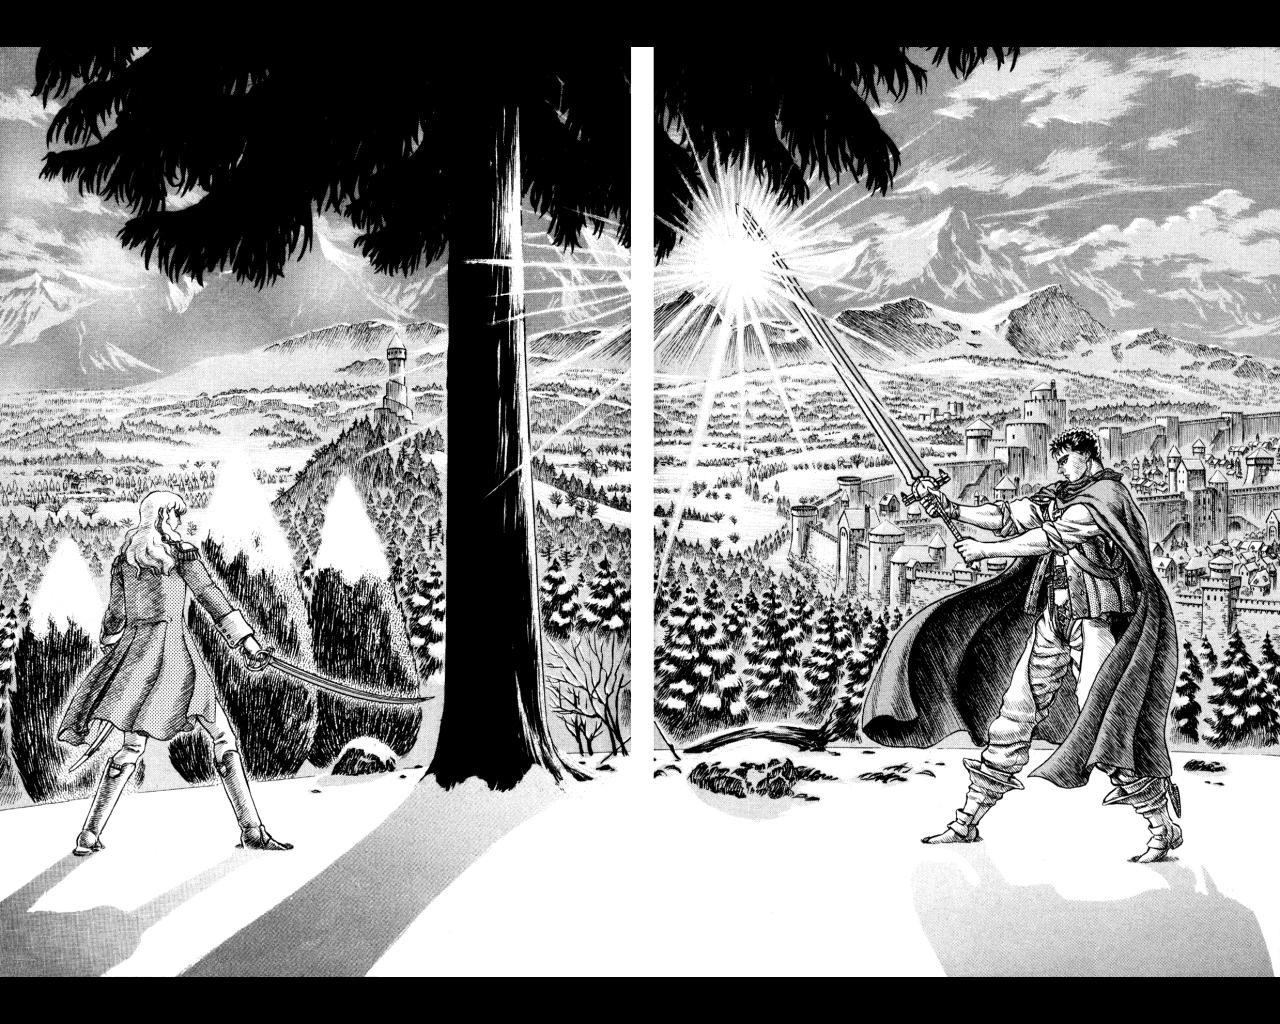 Griffith and Guts last fight with each other to determine whether Guts will stay with the Band of the Hawk from Berserk